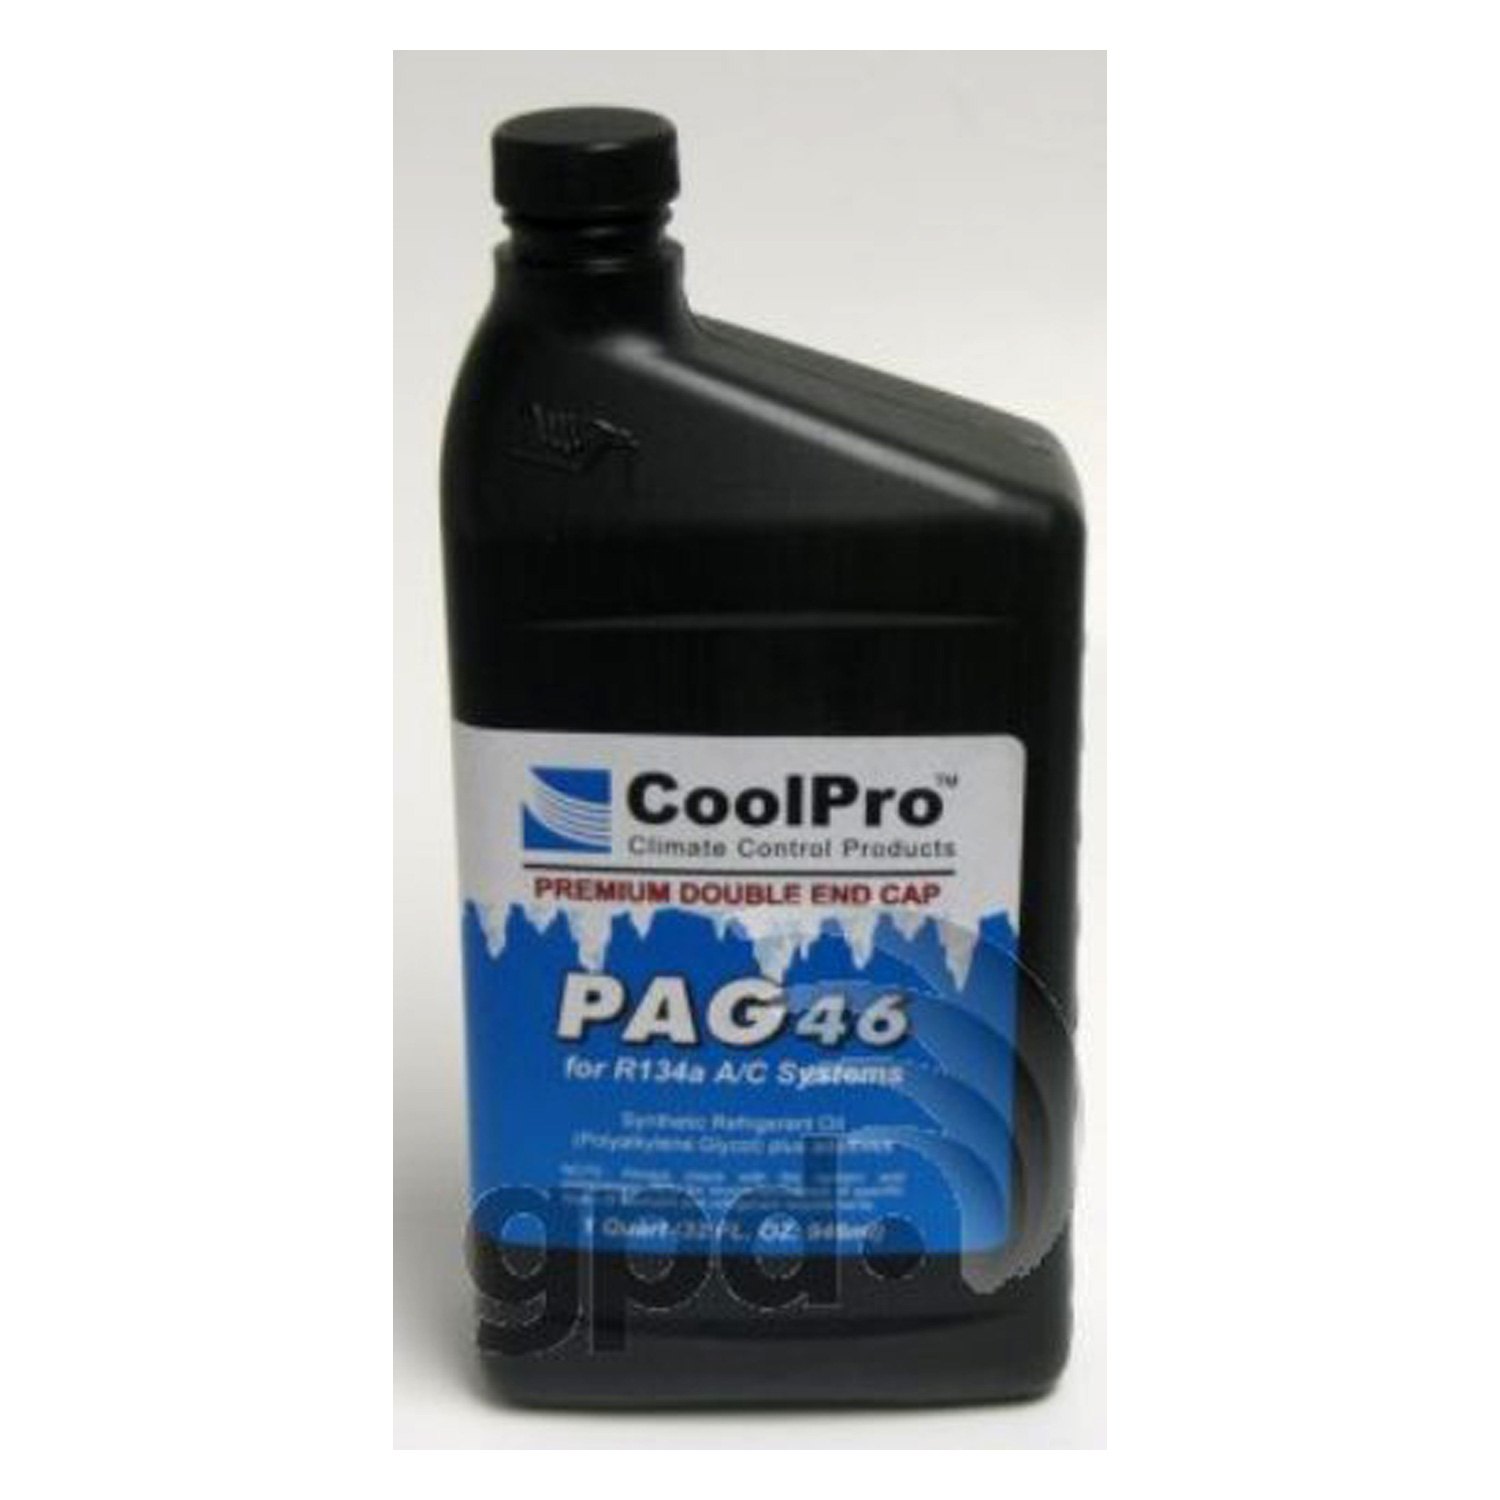 Gpd® Pag 46 R134a Synthetic Refrigerant Oil